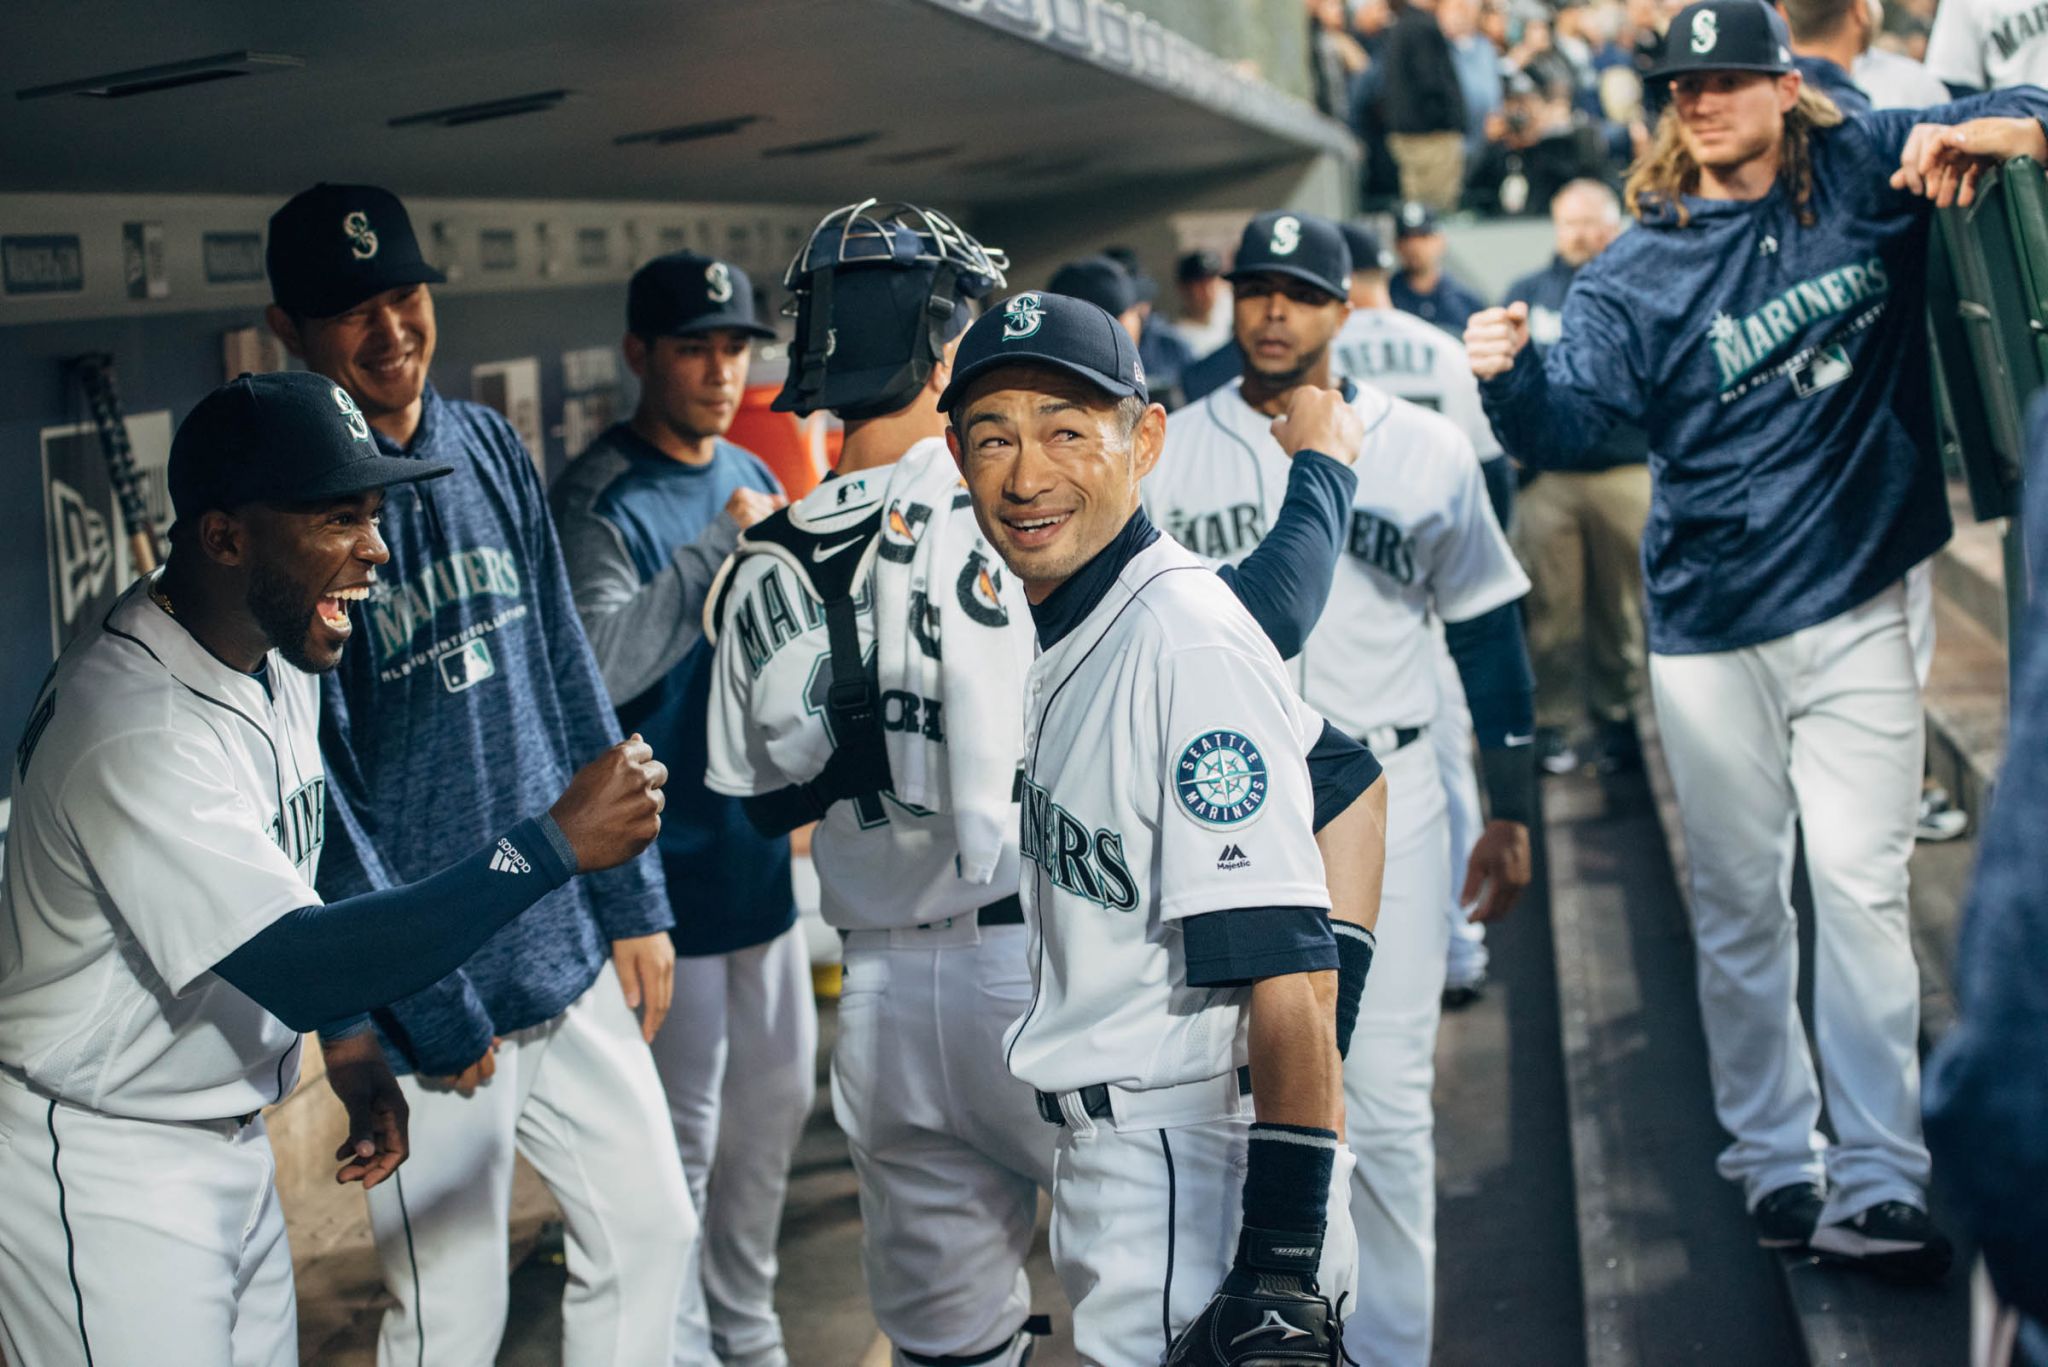 51 Days Until Opening Day: When Ichiro signed with the Seattle Mariners, he  chose to wear #51 which was previously worn by Randy Johnson. As a sign of  respect, Ichiro sent a